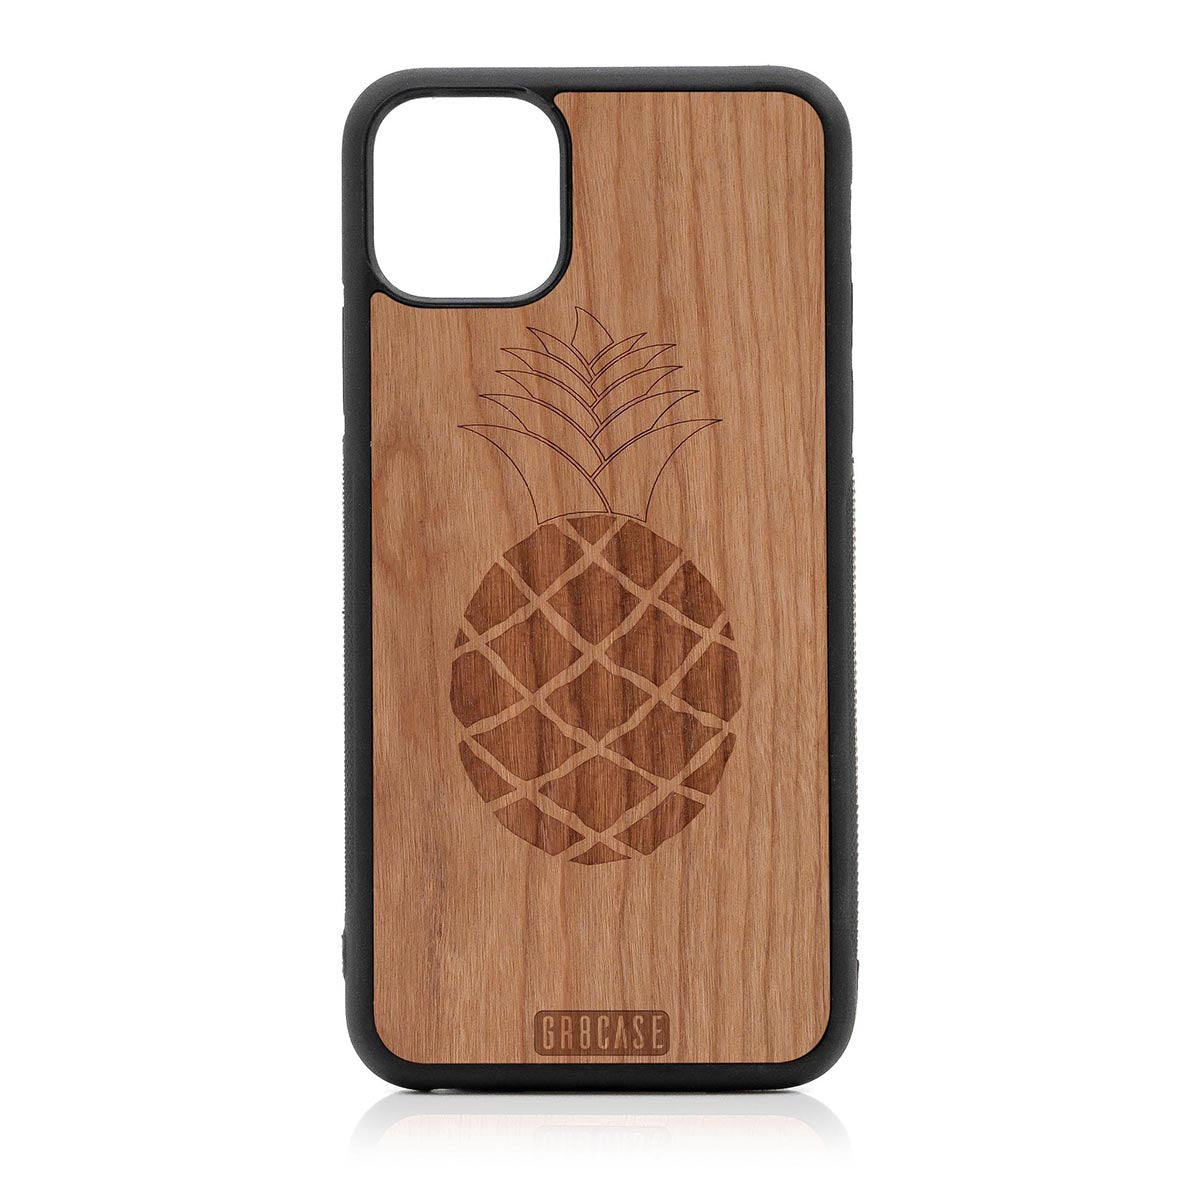 Pineapple Design Wood Case For iPhone 11 Pro Max by GR8CASE